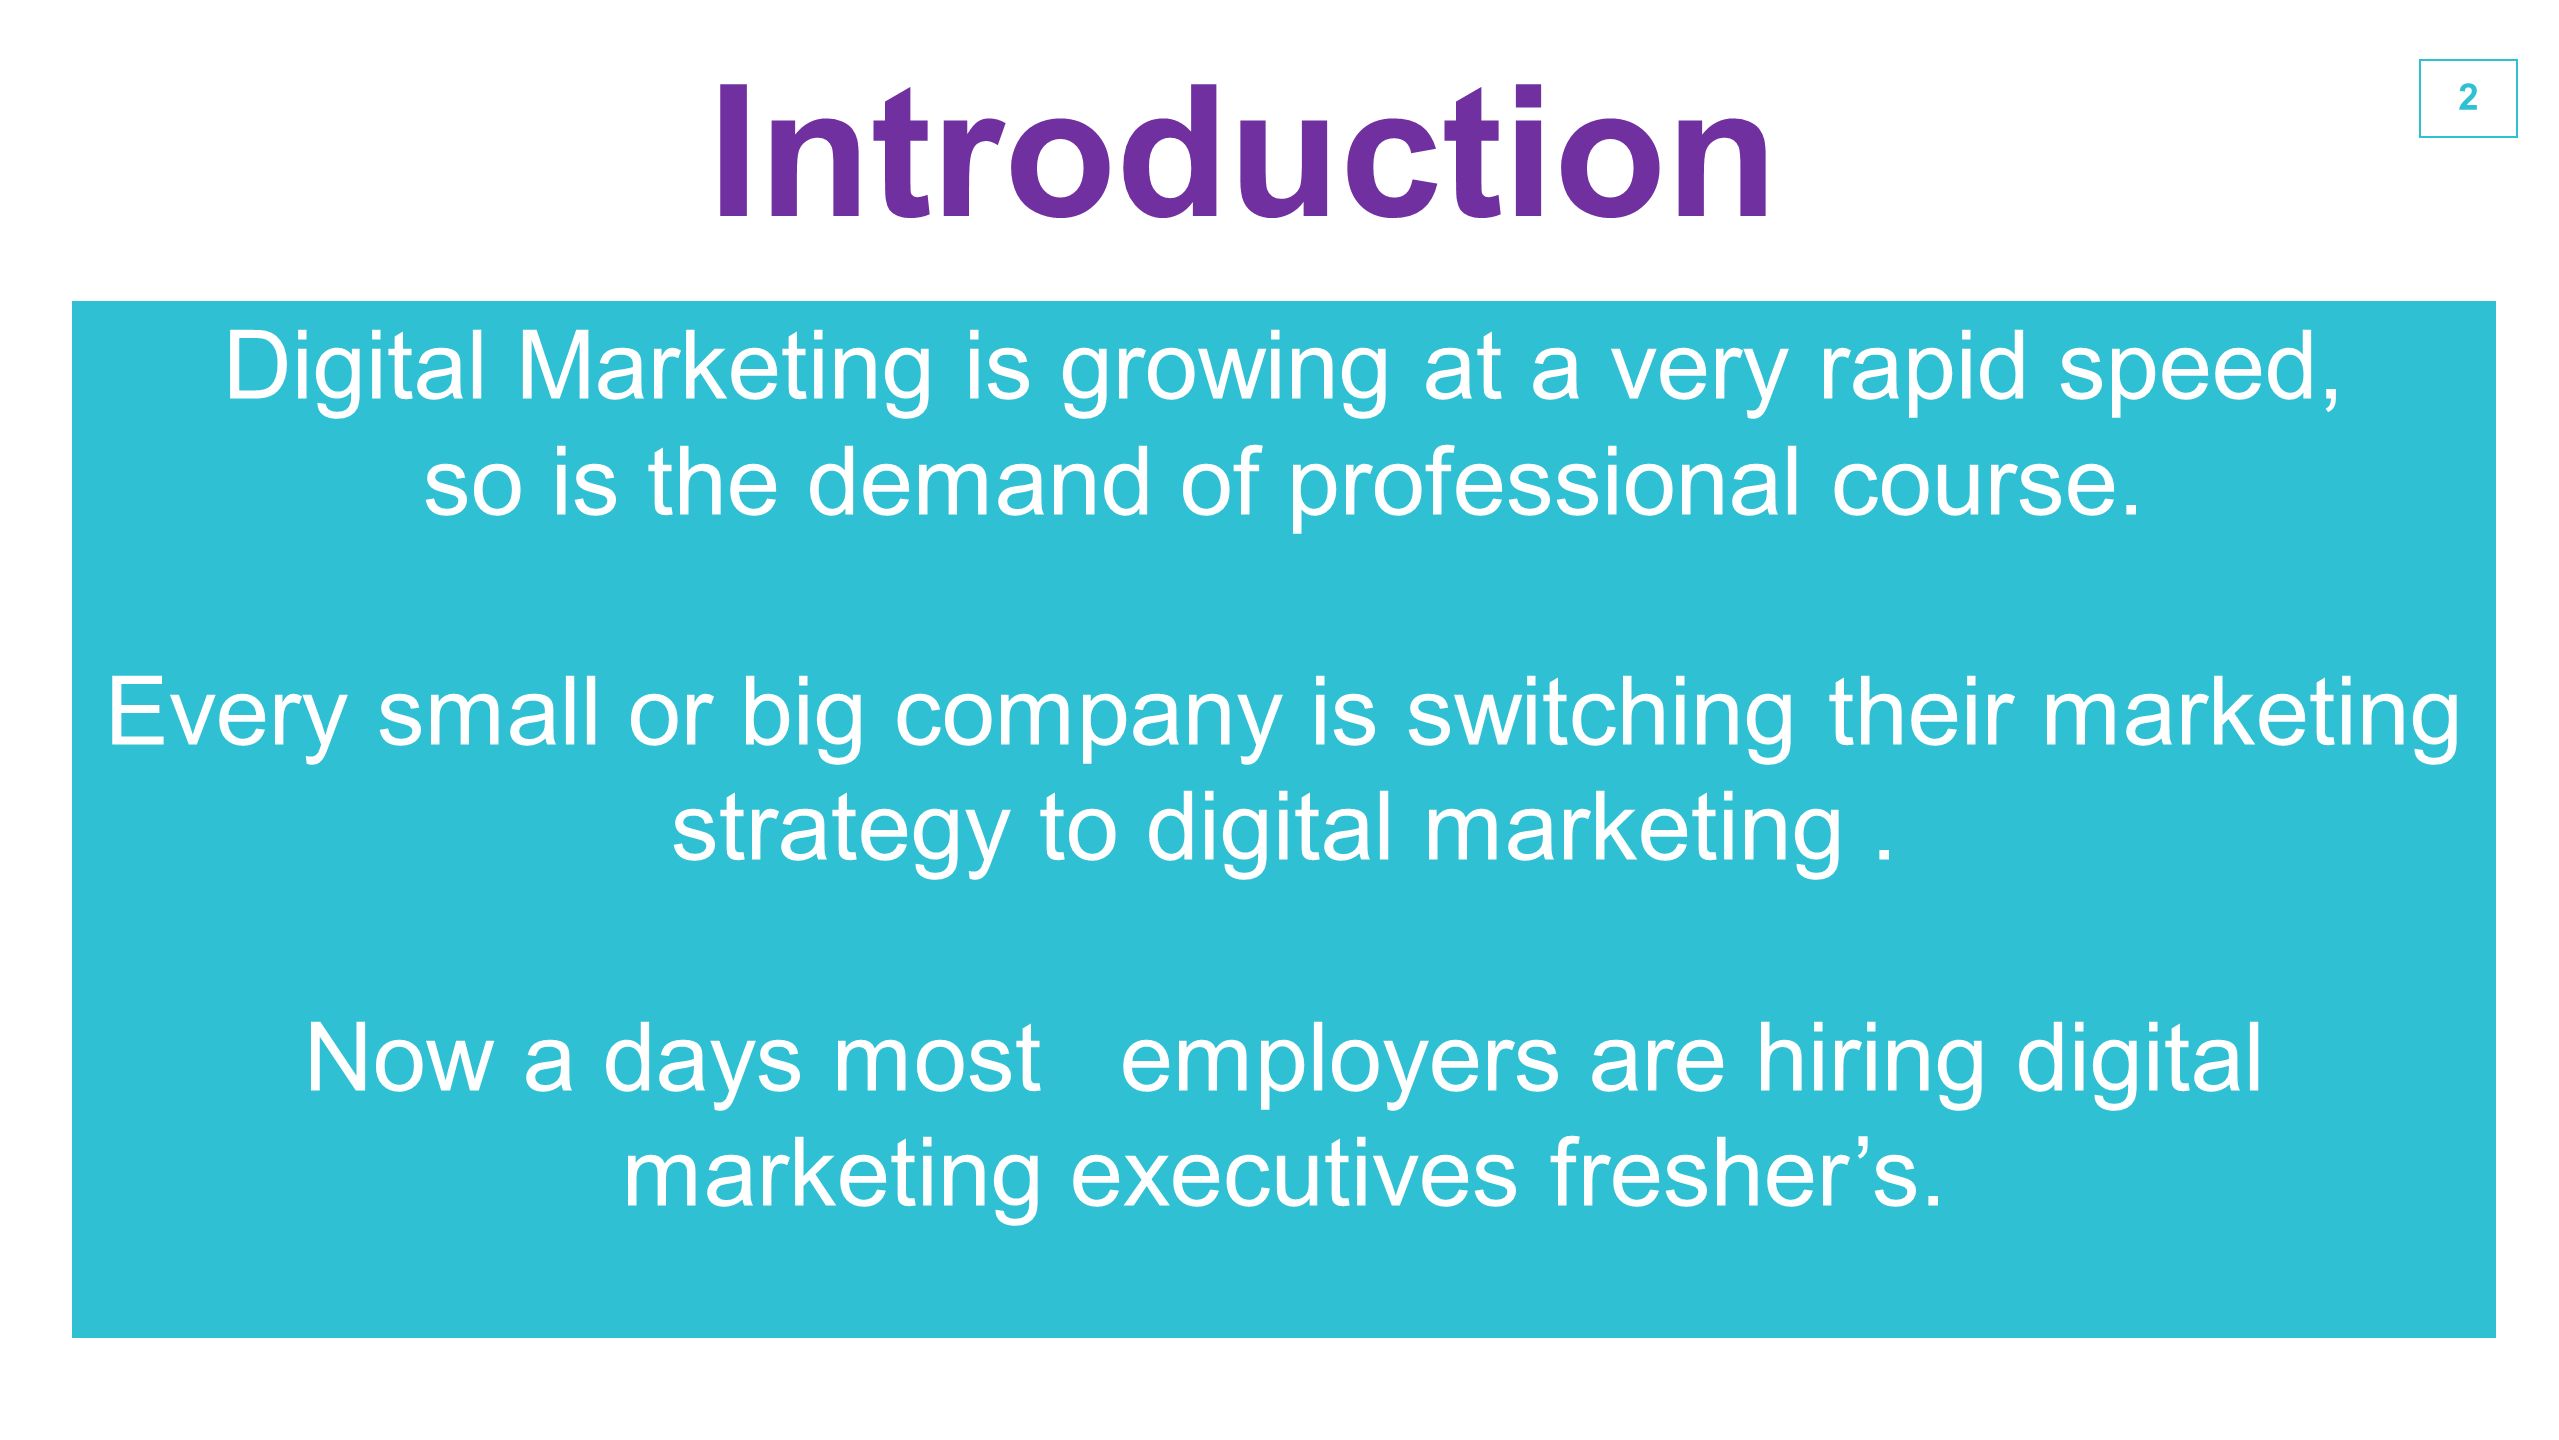 2 Introduction Digital Marketing is growing at a very rapid speed, so is the demand of professional course.